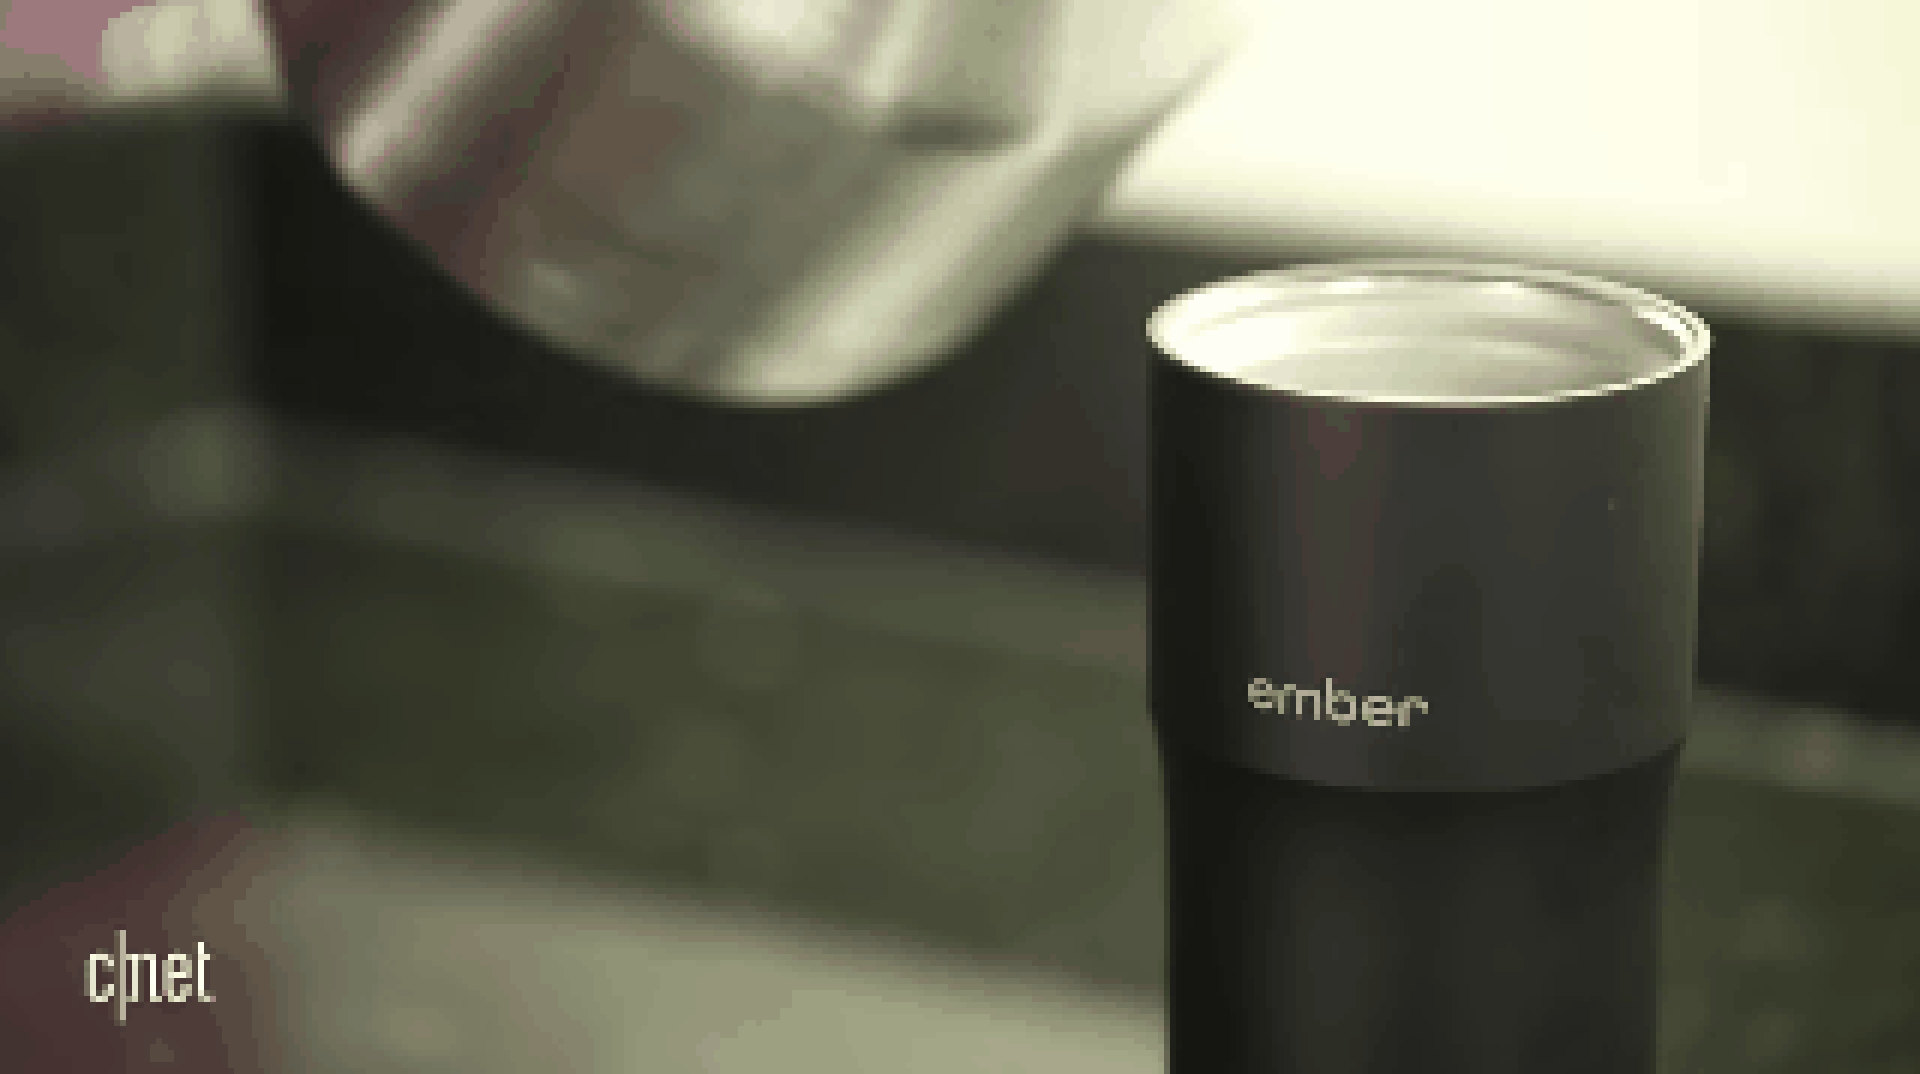 I fell in love with the Ember smart mug, and you could too - CNET